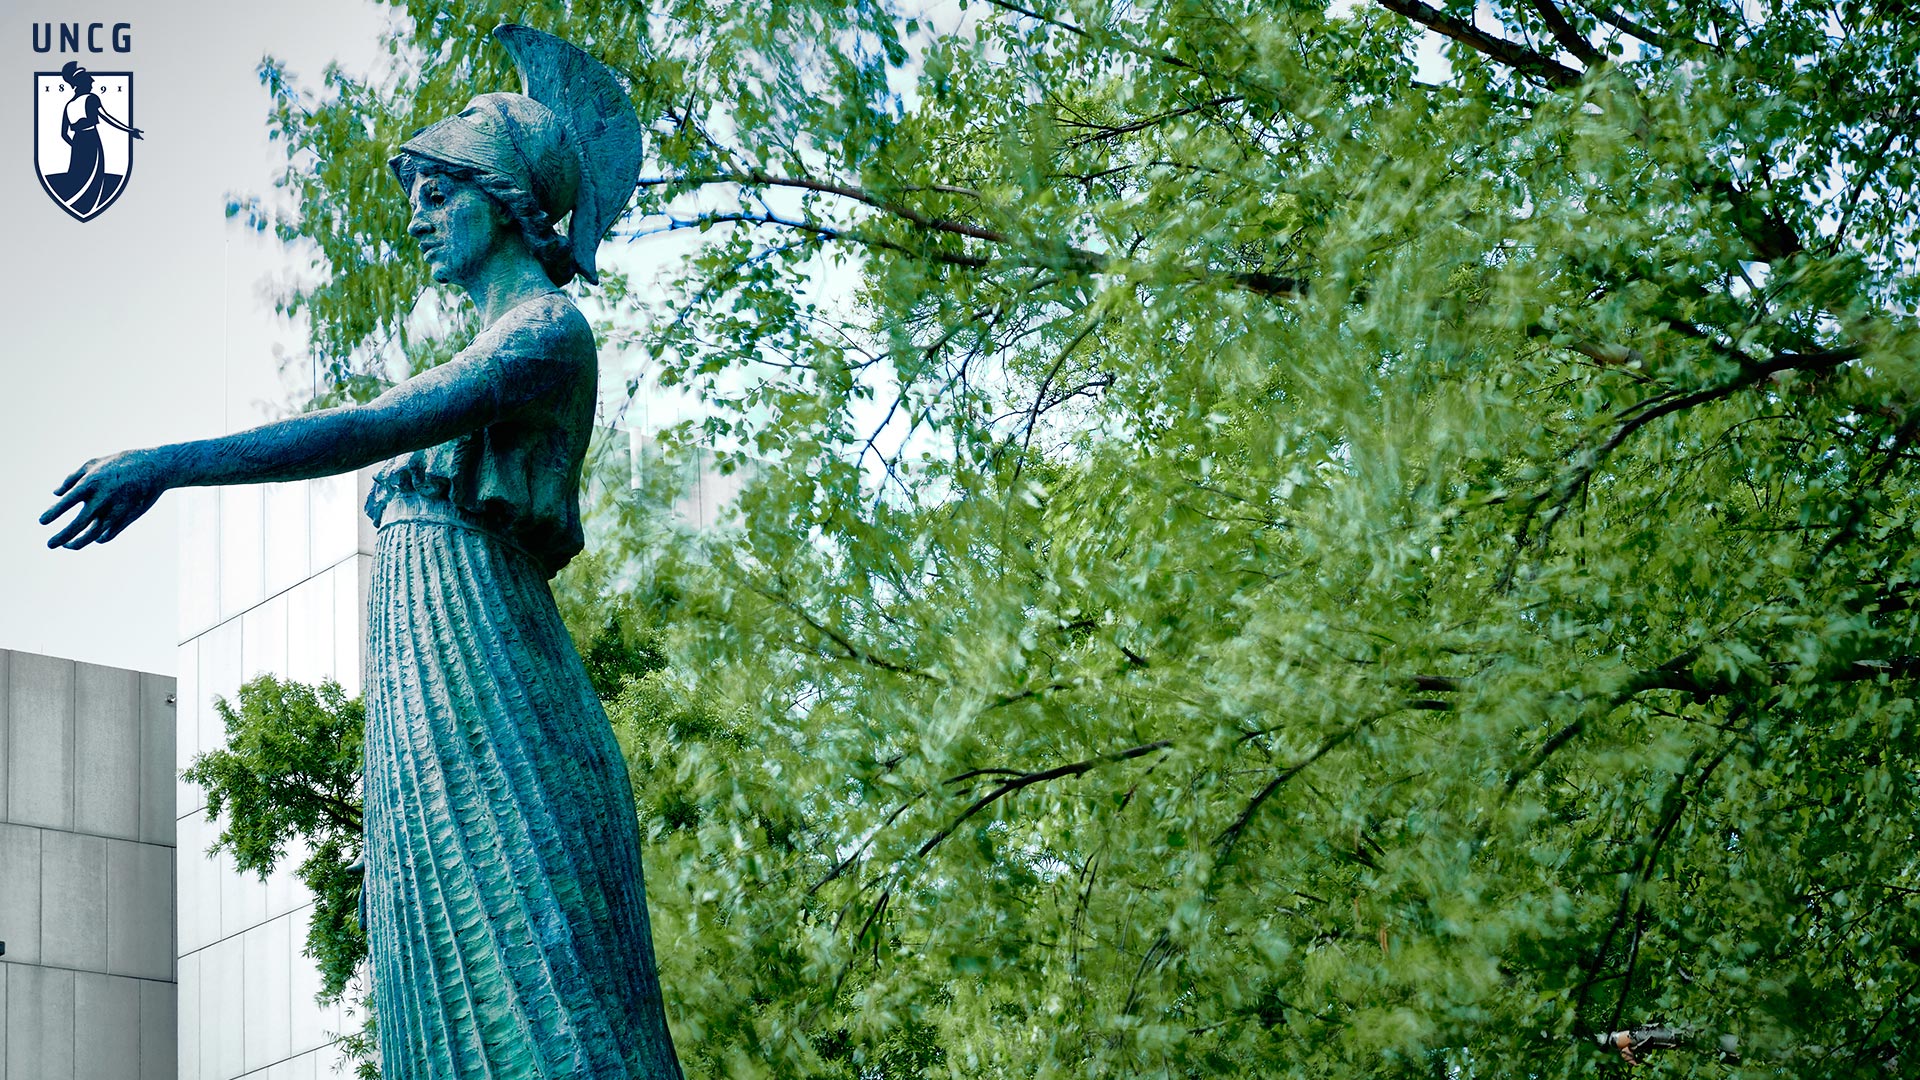 Minerva statue on the left showing a tree in the background with the UNCG logo in the top left corner